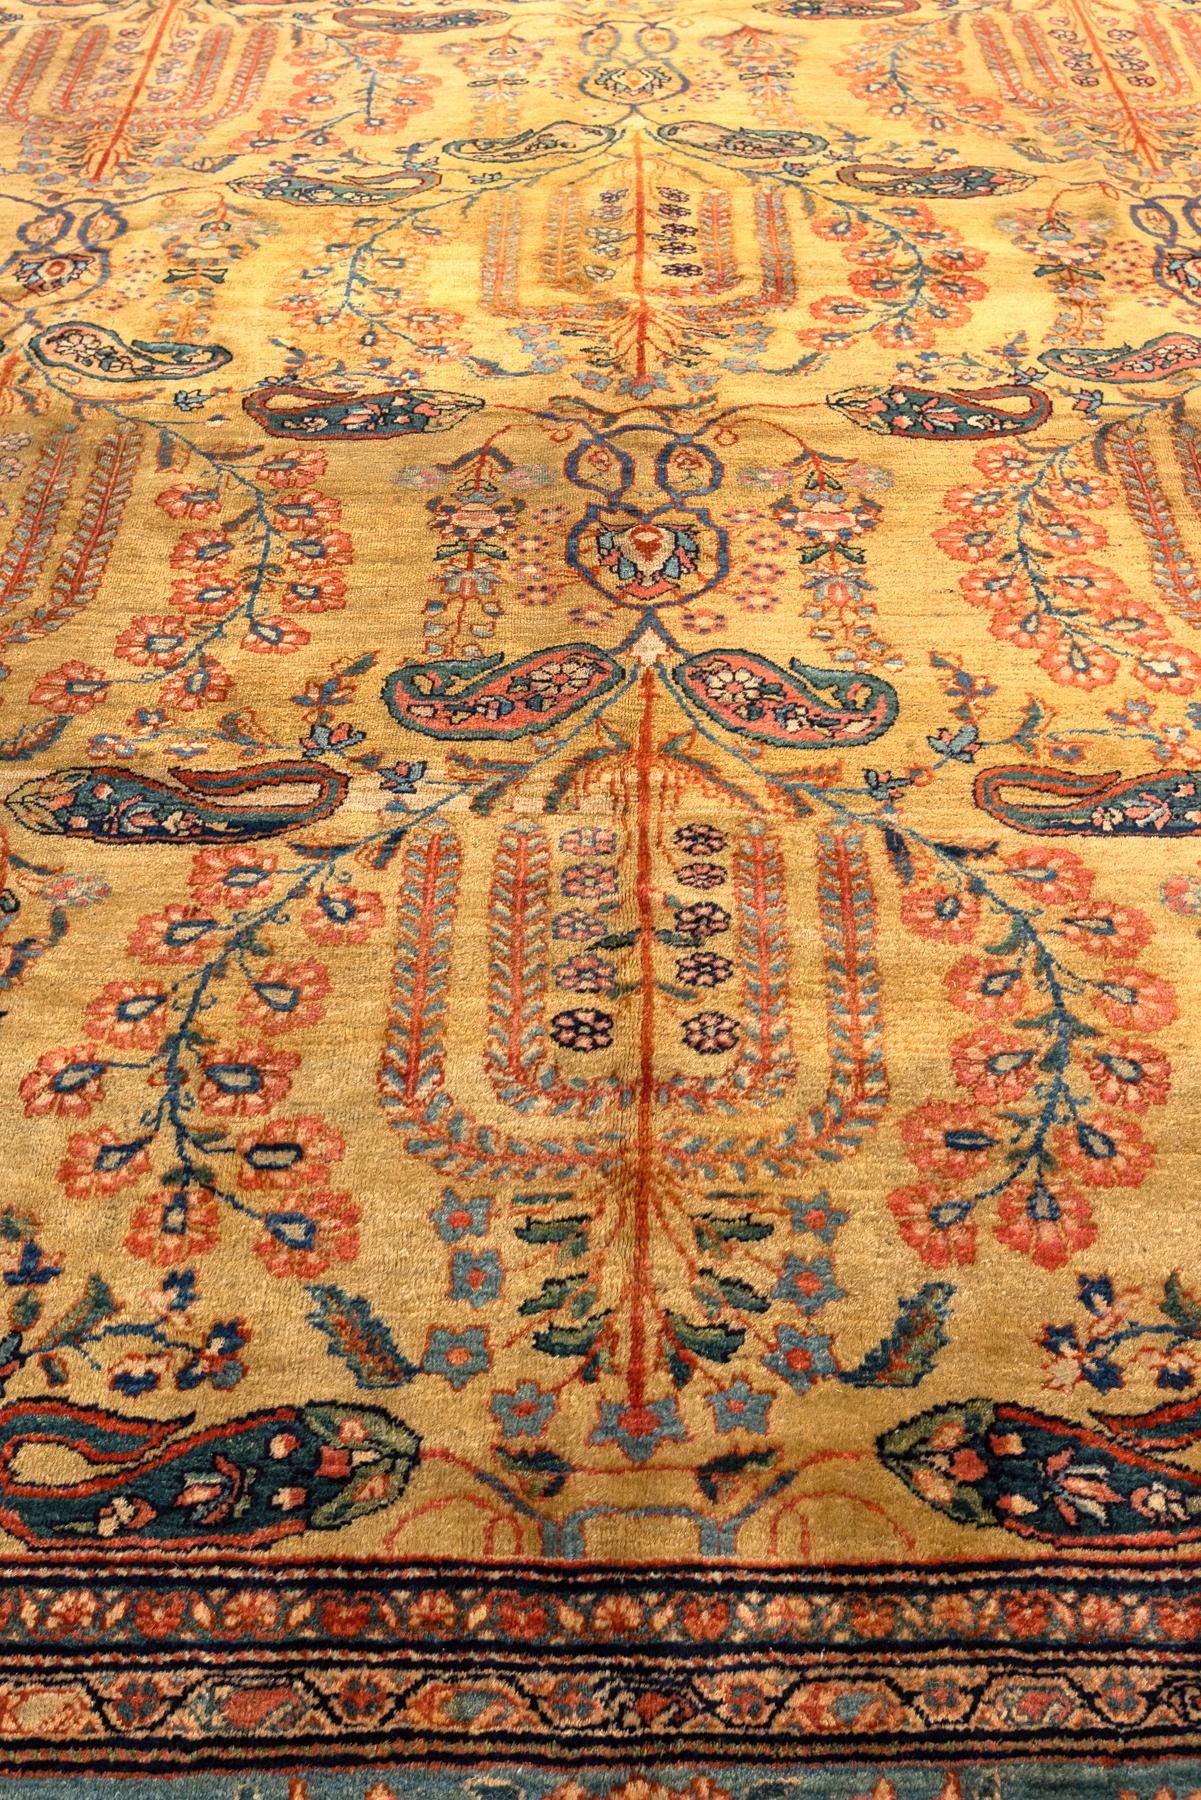 Farahan Sarouk – Western Persia

Created during the height of the Second Golden Age of Persian Carpets, this monumental rug was indeed woven in one of the finest workshops of the centuries-old city of Farahan, known for its splendid, finely woven